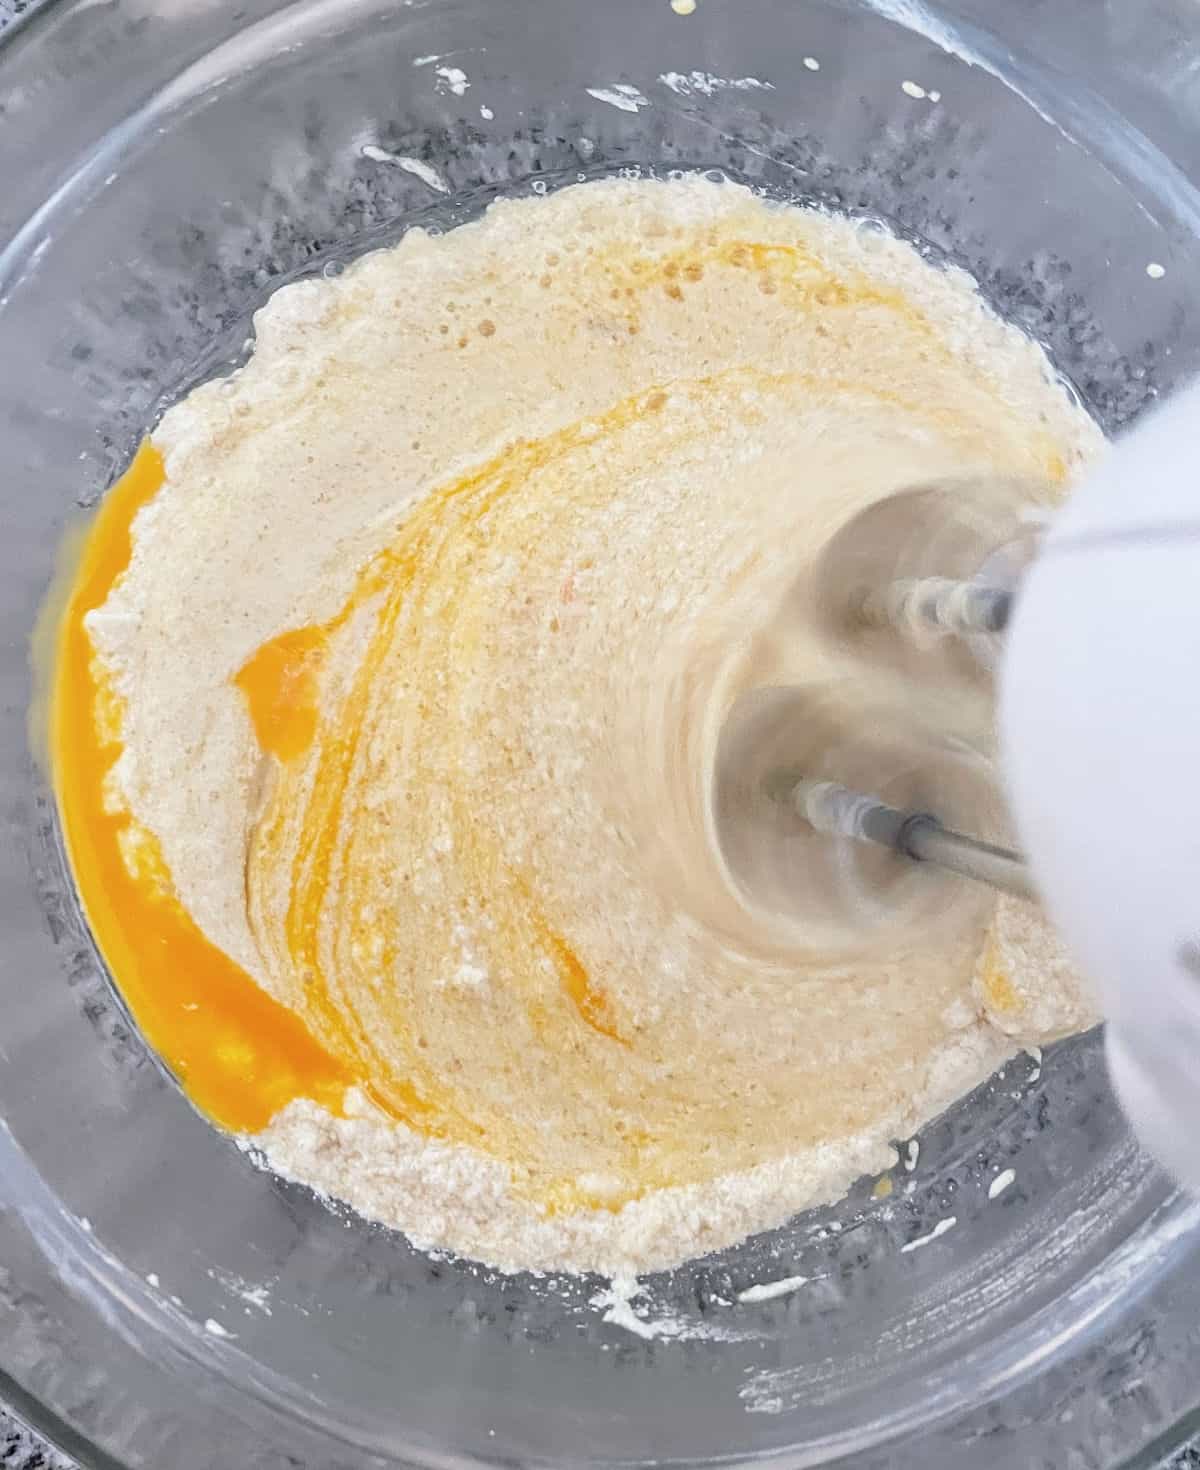 Beating egg into cake batter in a glass bowl on a grey surface. 